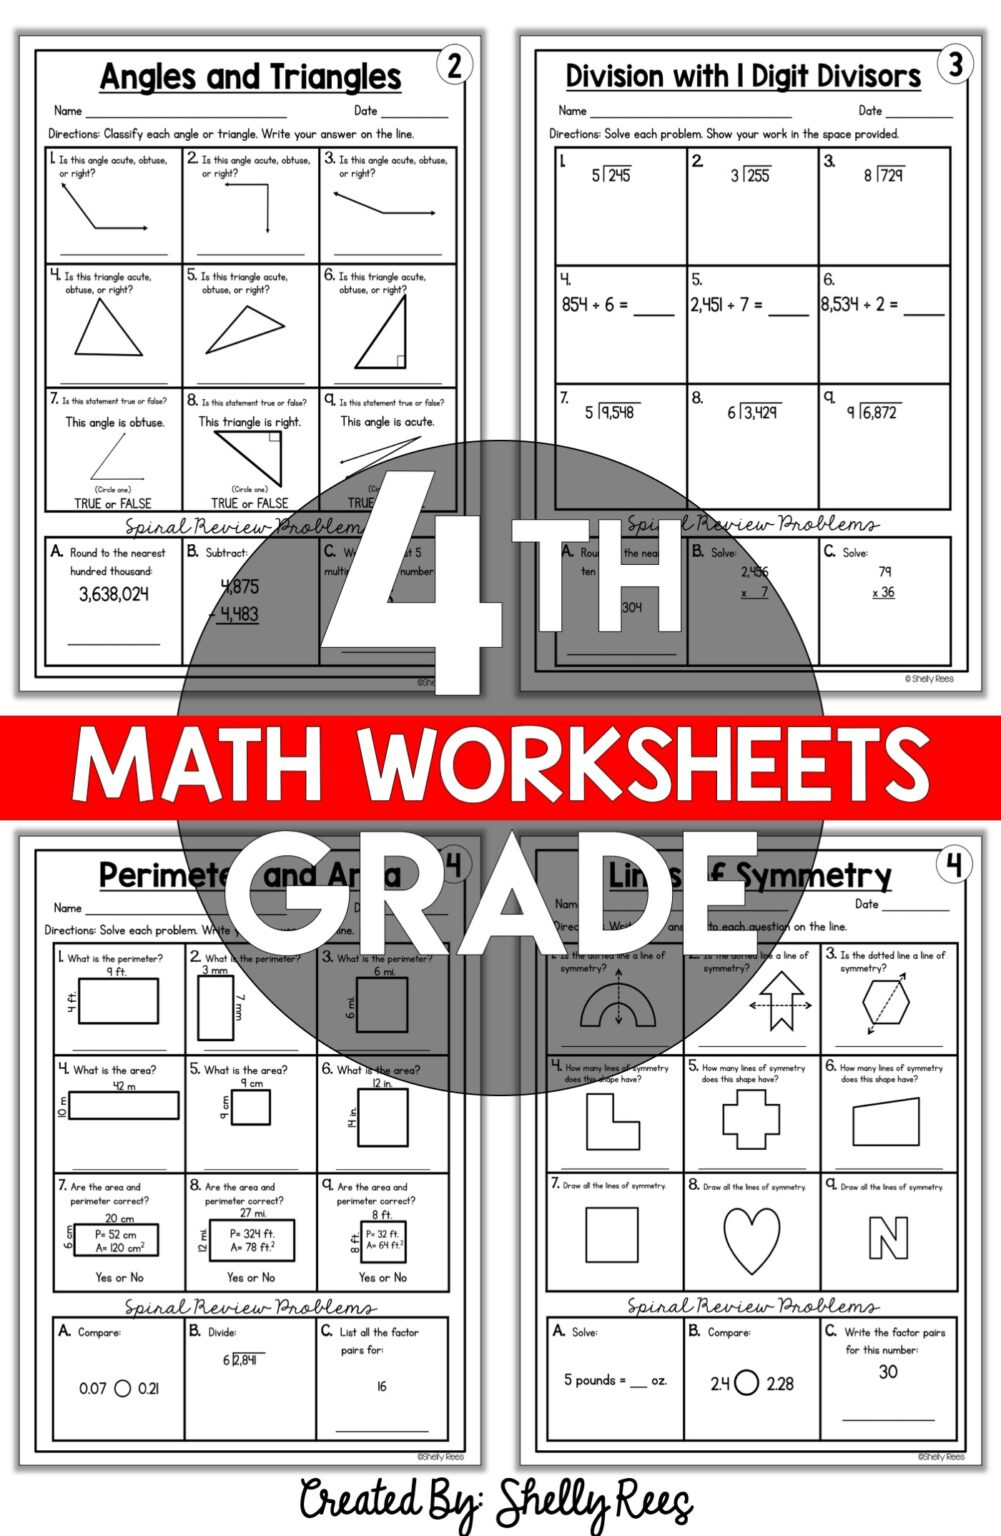 4Th Grade Math Worksheets Free And Printable - Appletastic Learning - Free Printable Addition And Subtraction Worksheets For 4Th Grade